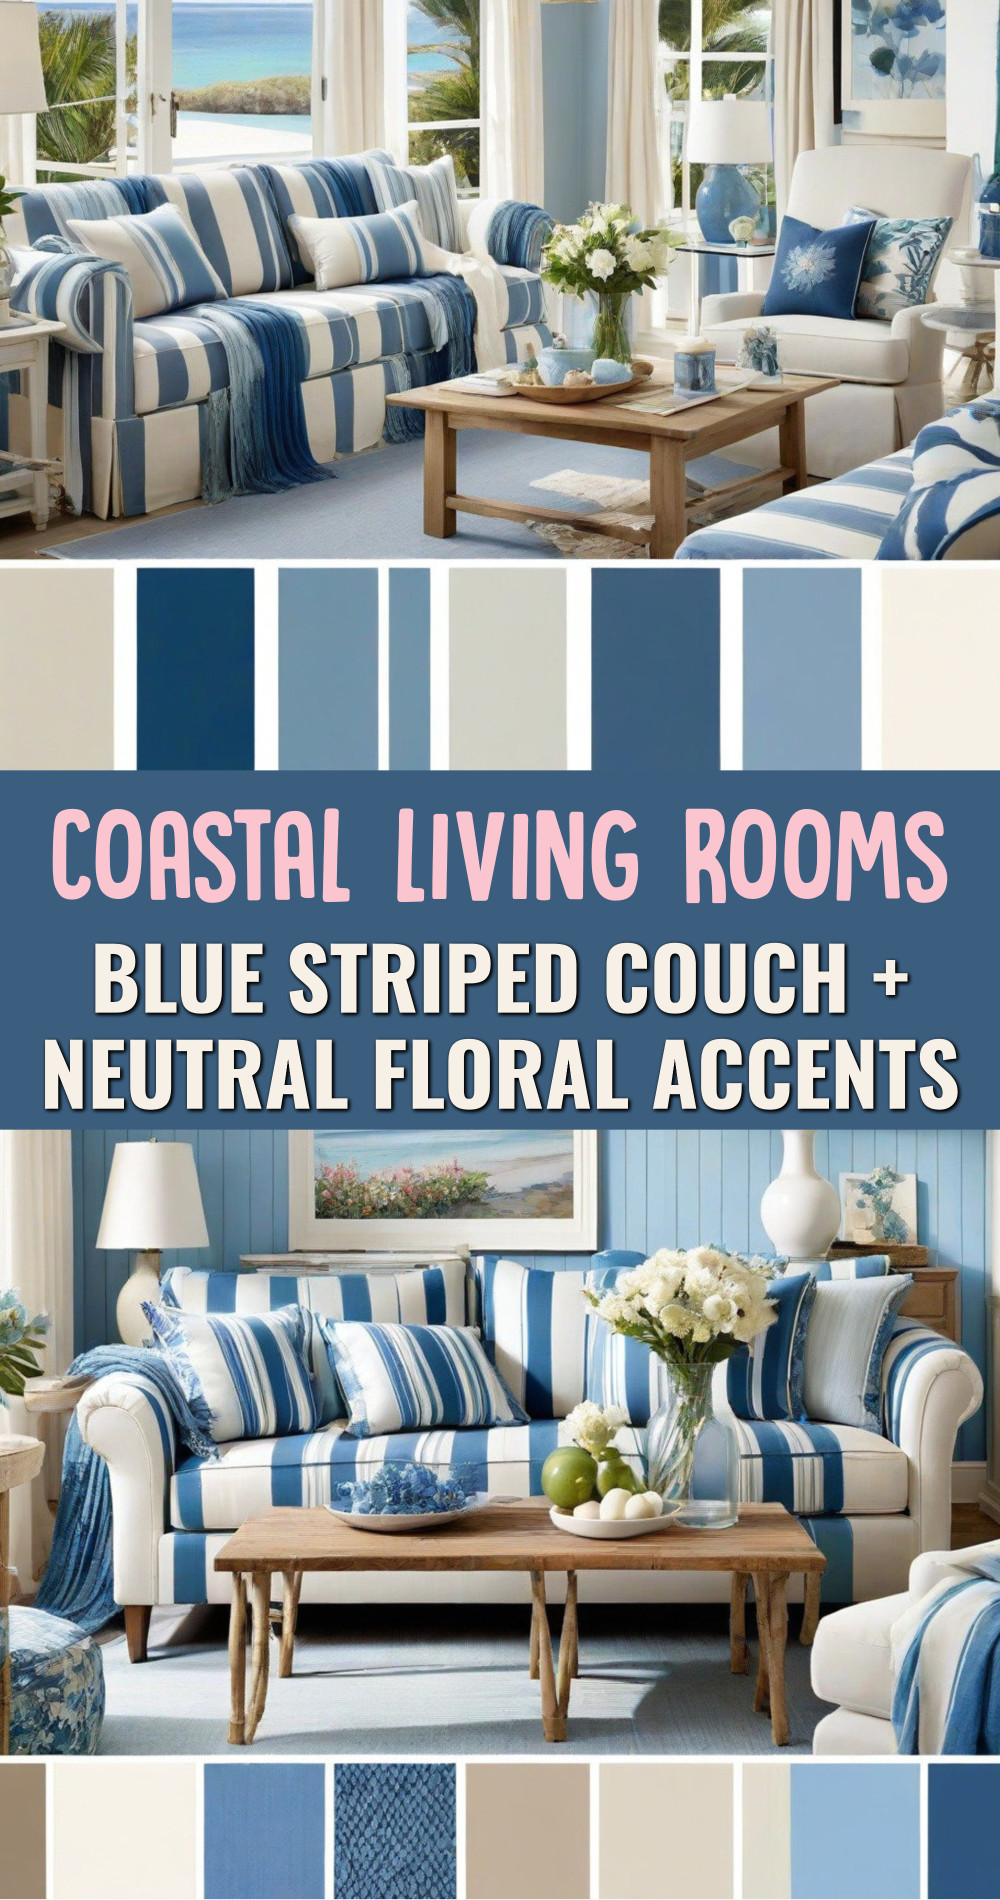 Coastal Living Room Ideas Blue Striped Couch Neutral Floral Accents